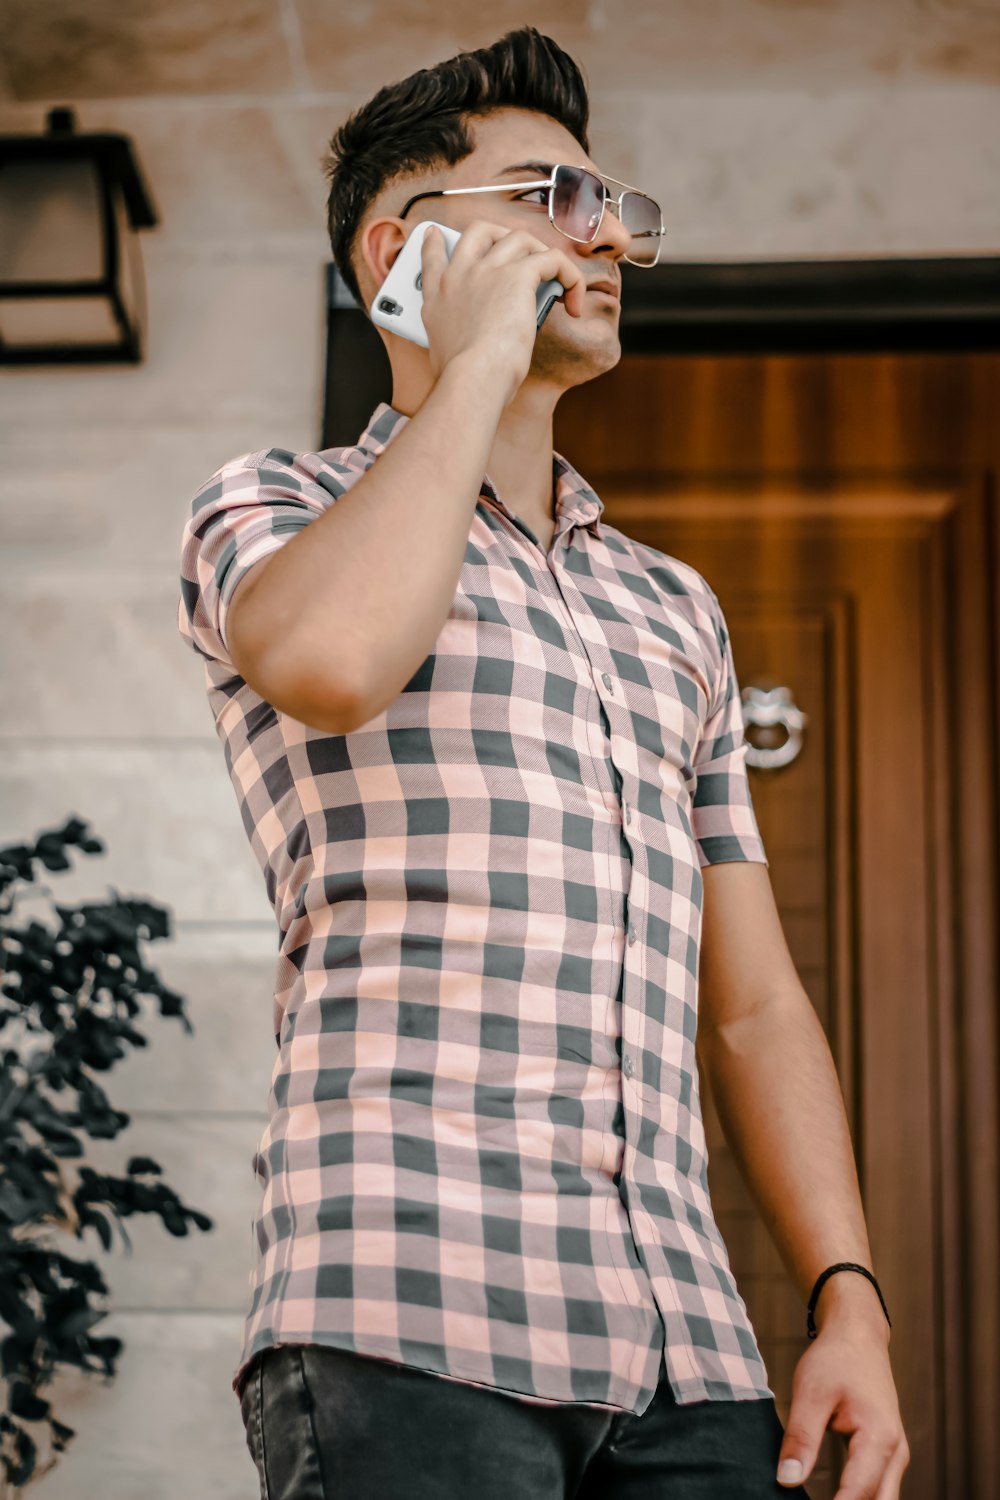 a man wearing glasses talking on a cell phone